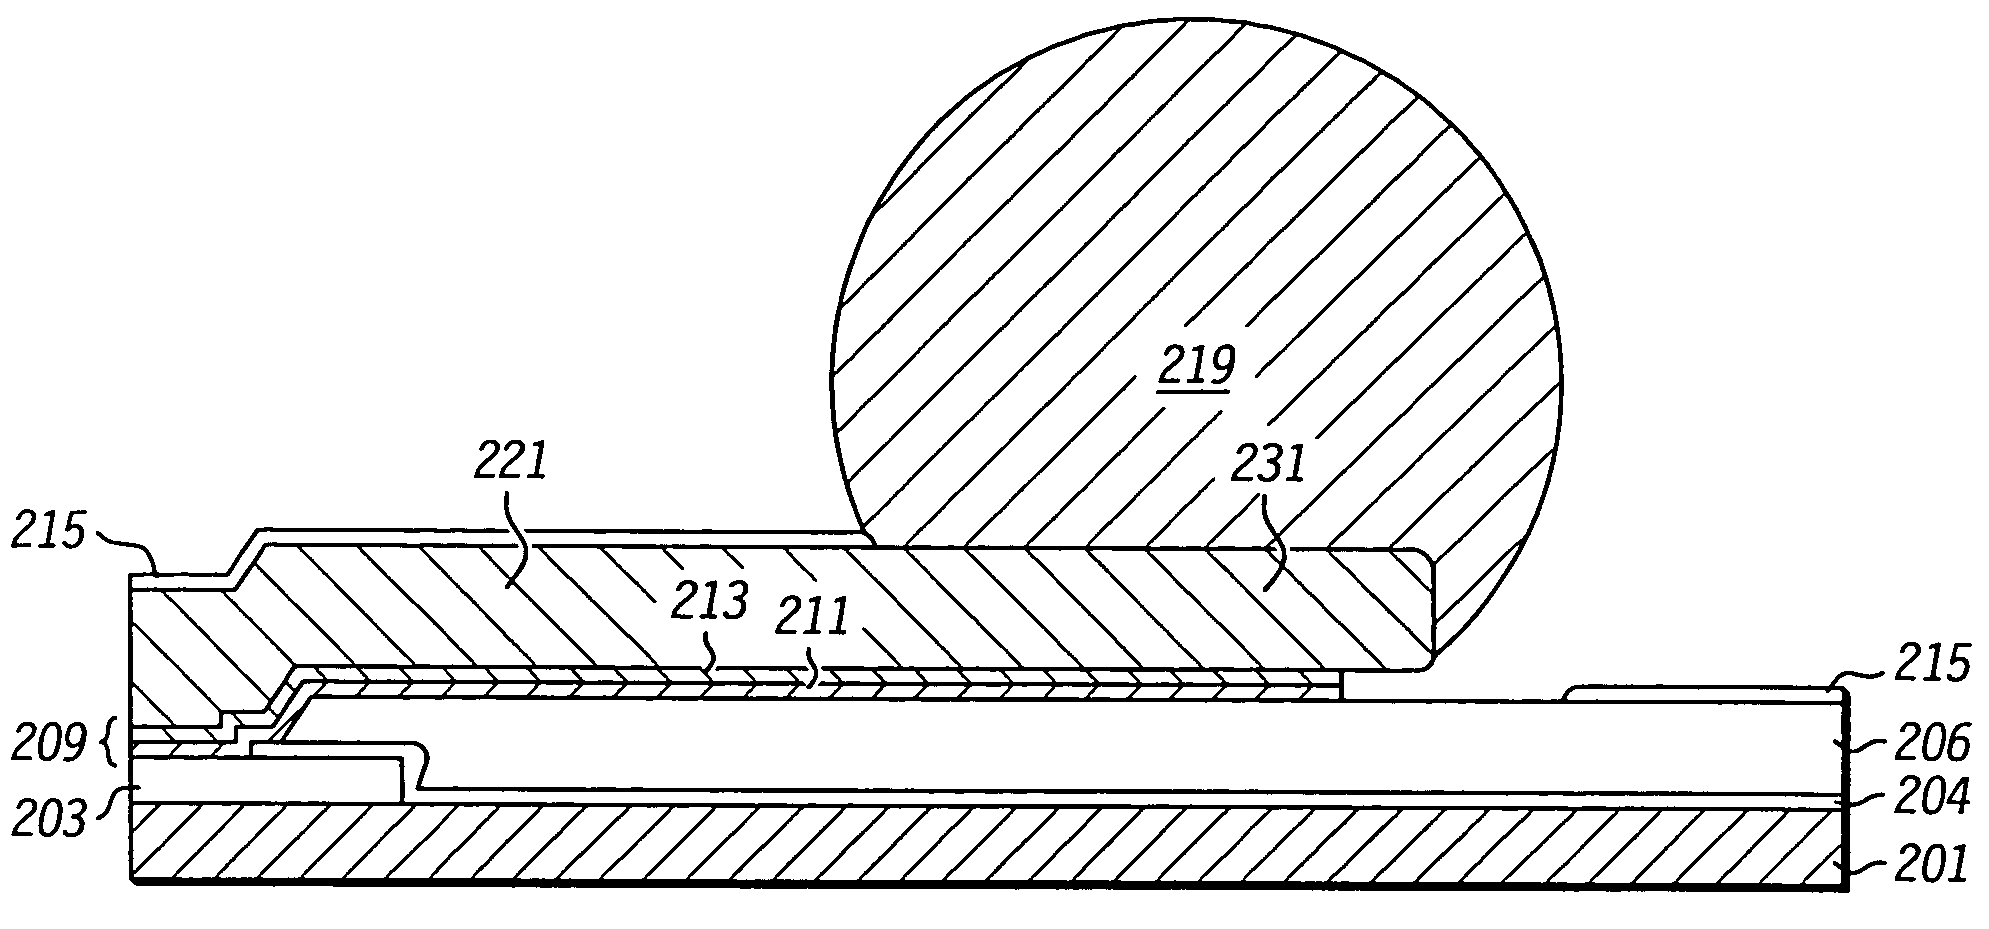 Semiconductor device with strain relieving bump design